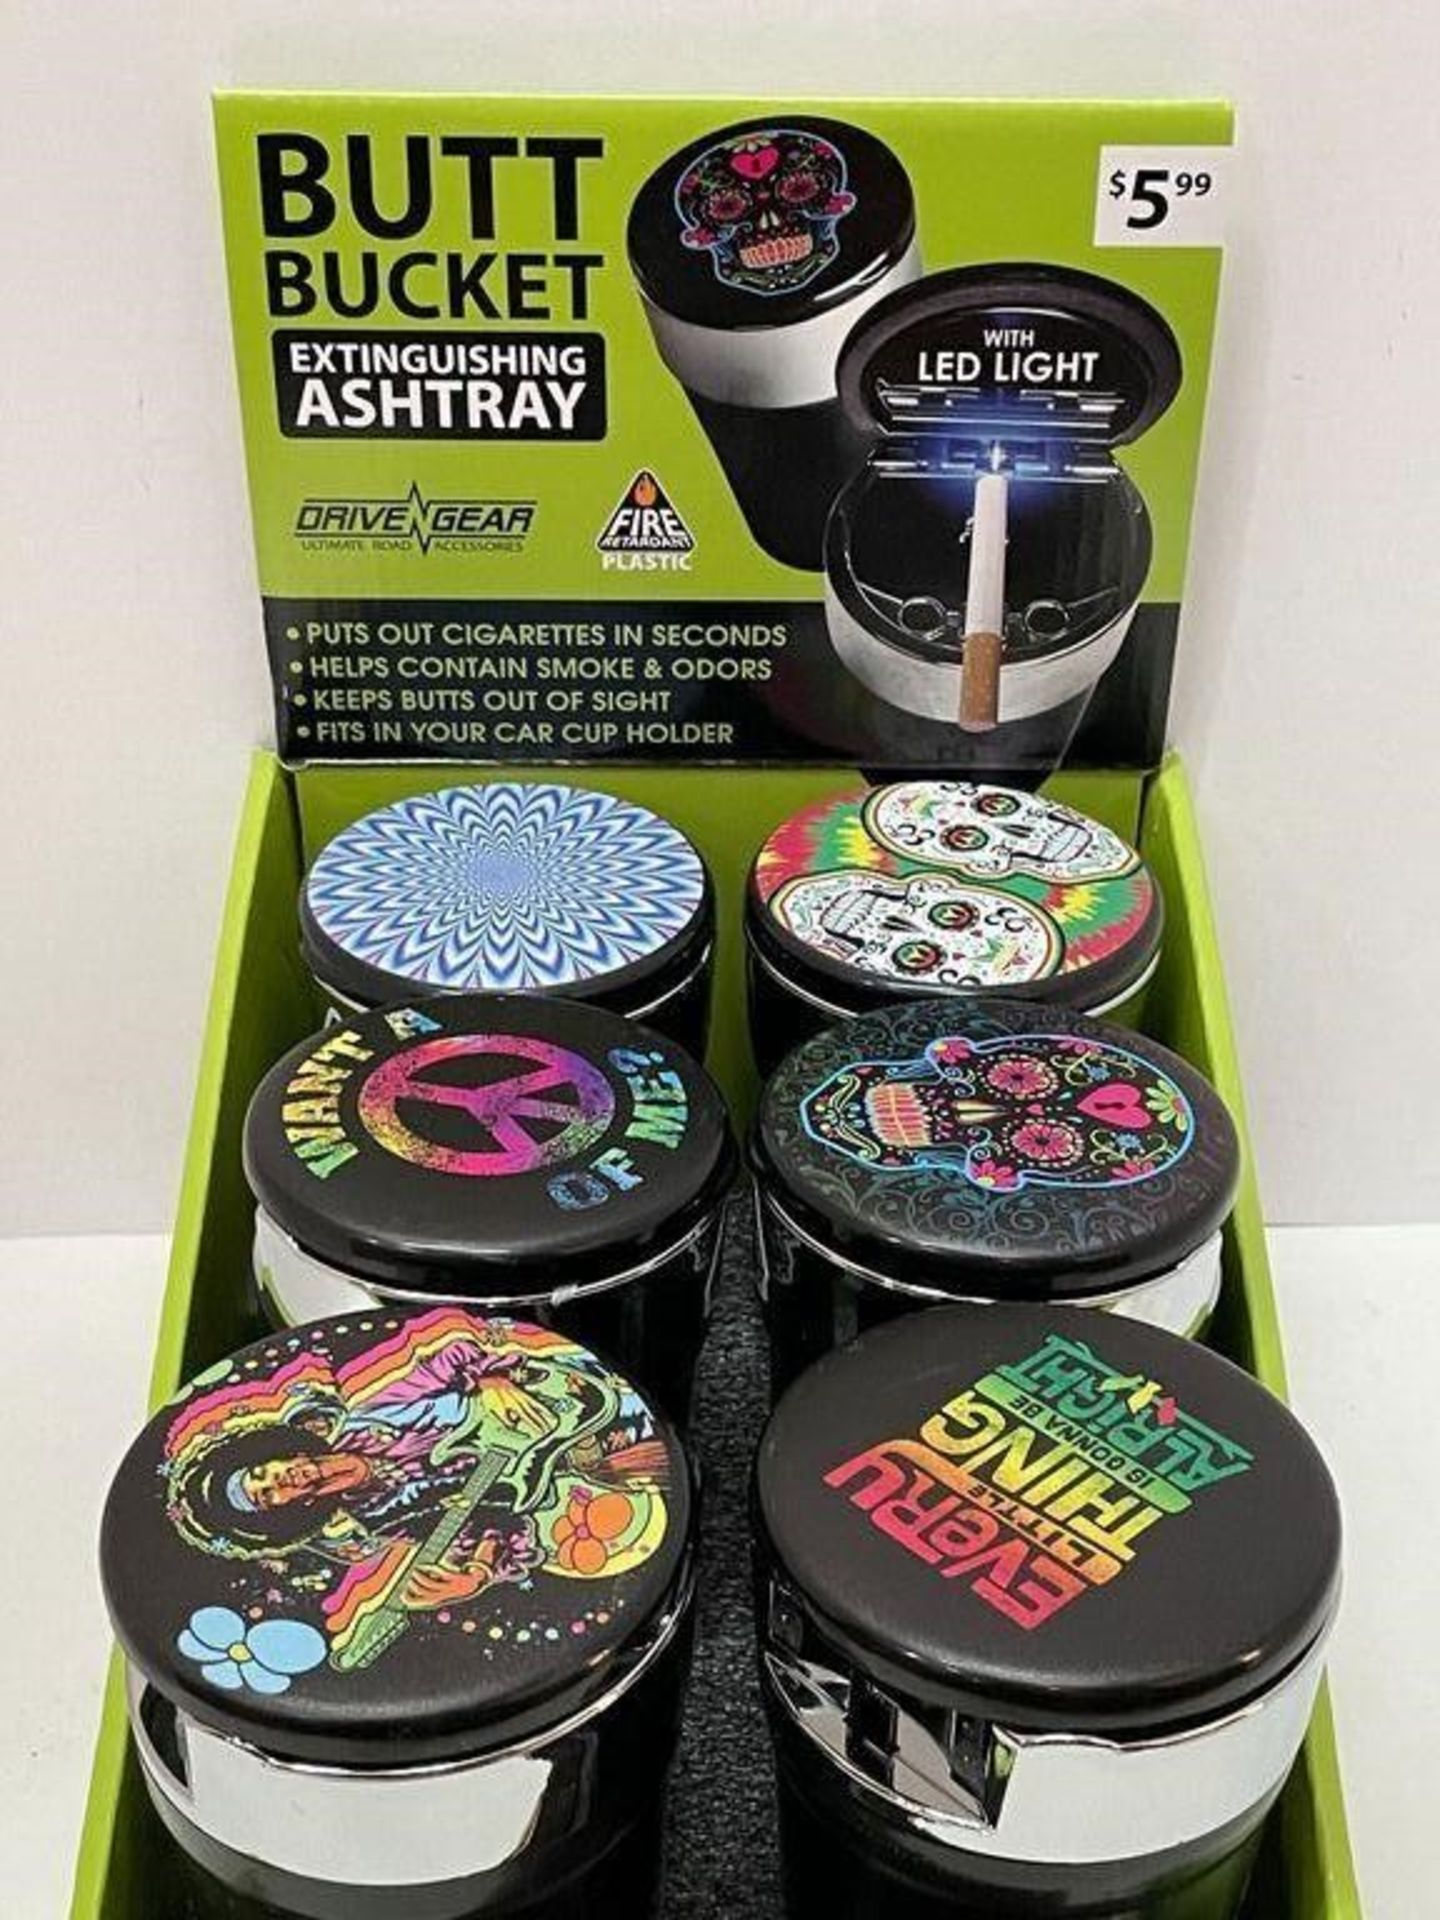 6 X LED BUTT BUCKET EXTINGUISHING ASHTRAYS VARIOUS DESIGNS IN DISPLAY CASE - Image 3 of 3